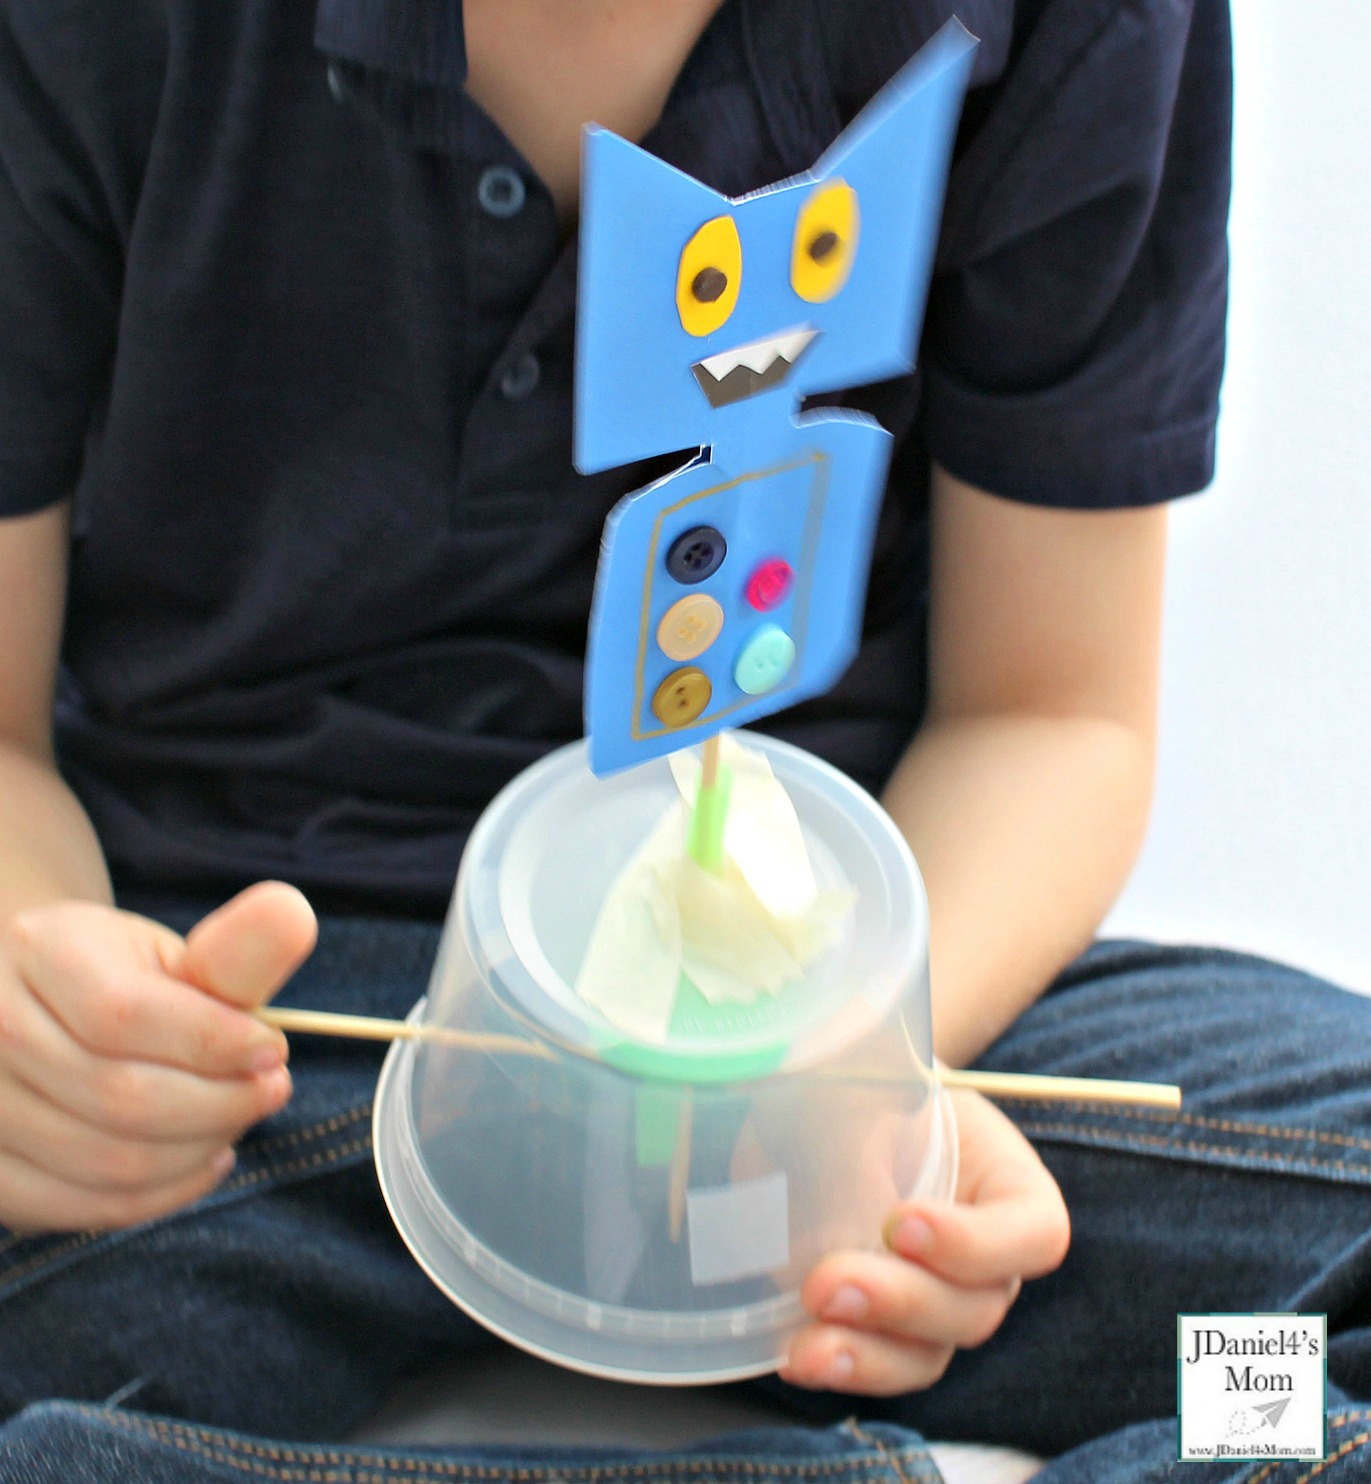 Let’s Make Robots that Look like Robo-Pete the Cat- Spinning the Cat